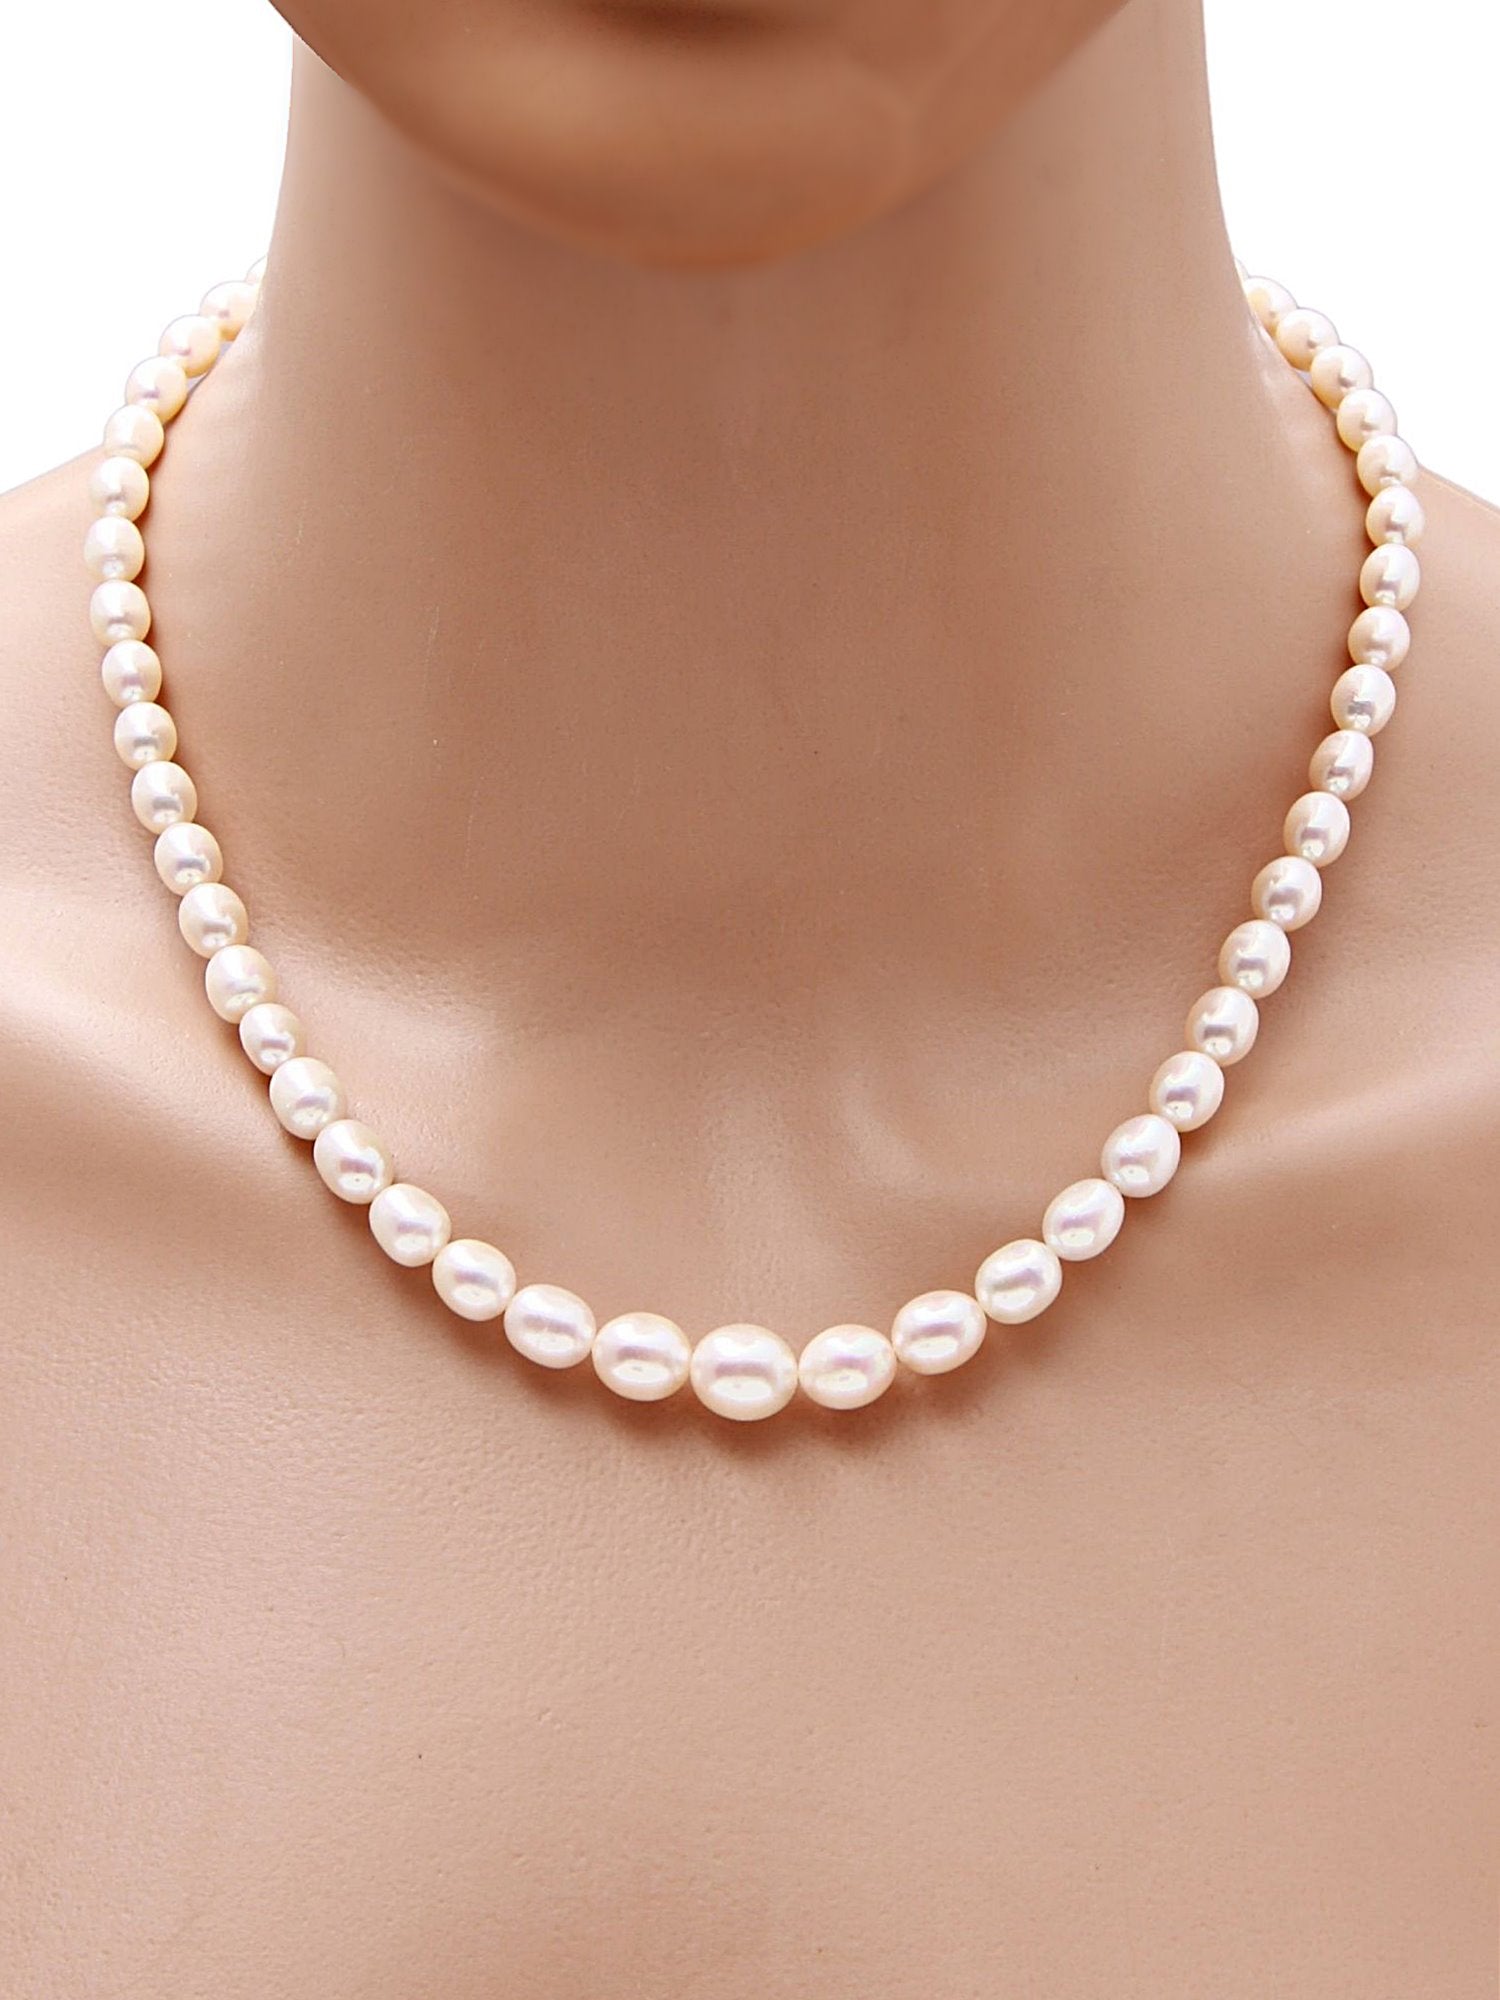 High Luster Oval White Freshwater Pearls Necklace AAA Grade with 92.5 Sterling Silver Clasp, 135 Carats - (F1027)